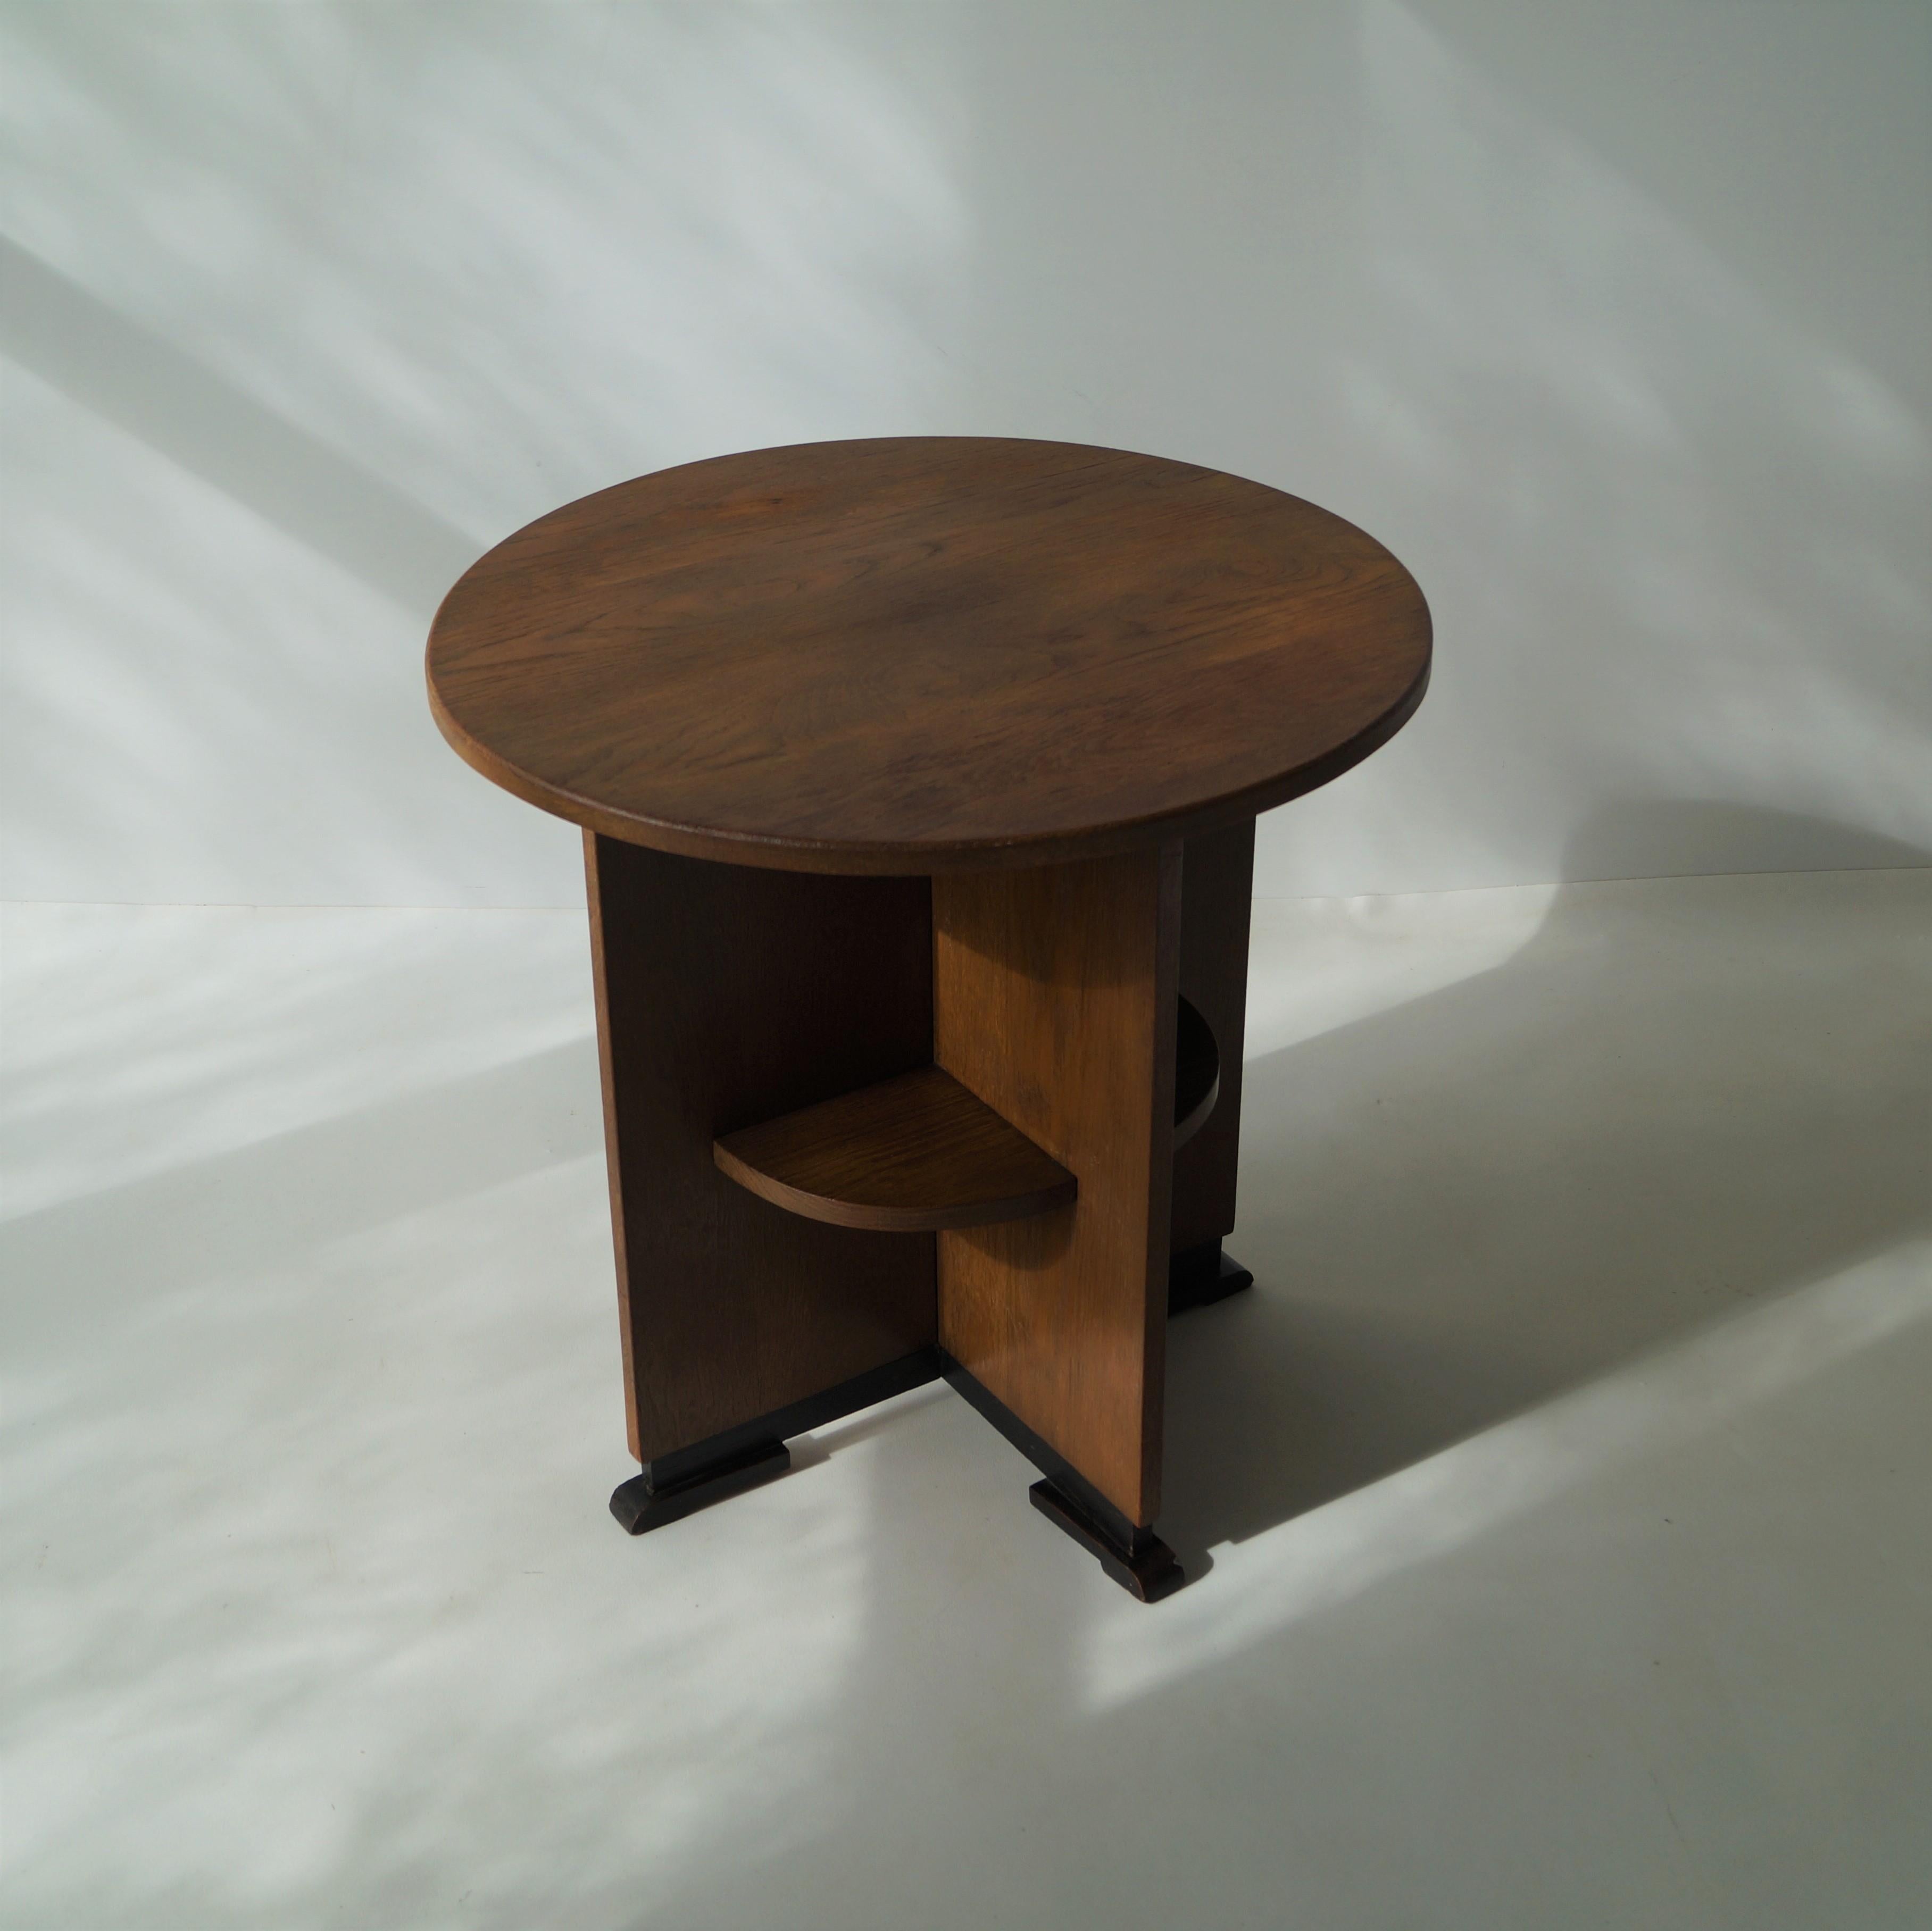 Dutch Art Deco (Haagse School) Occasional Table with Modernist Lines, 1920s 1